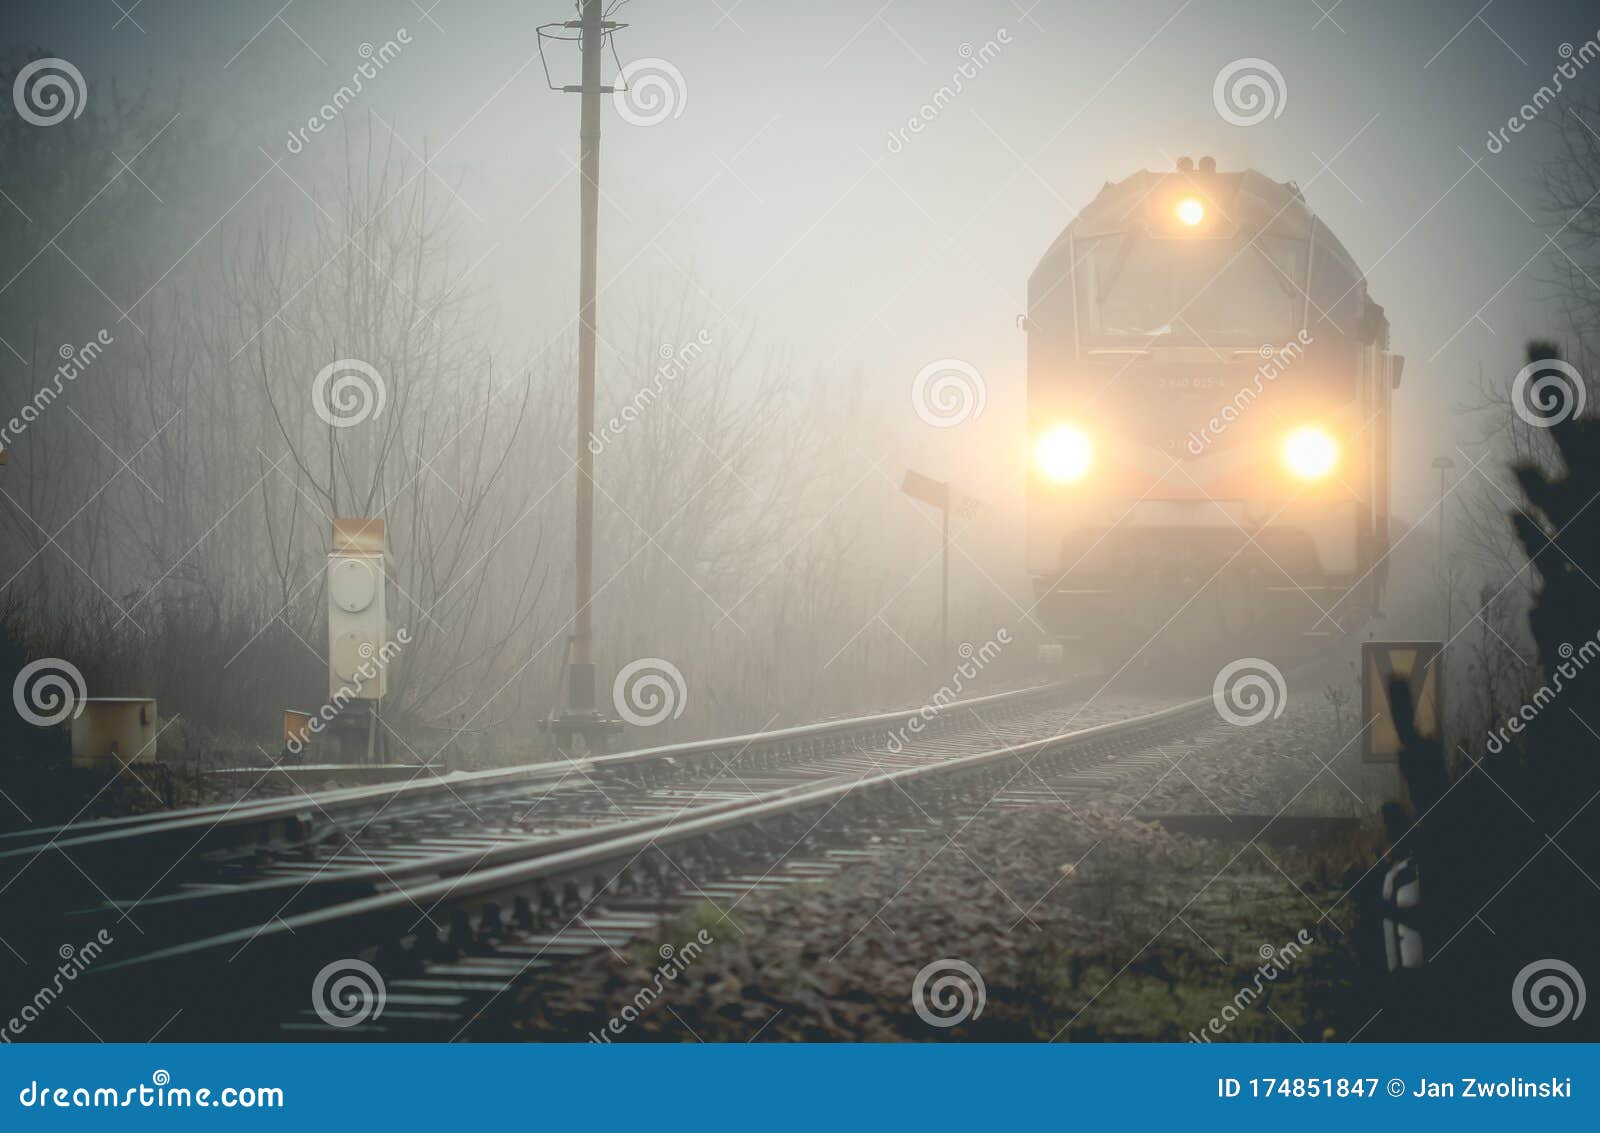 cargo train emerging from the mist